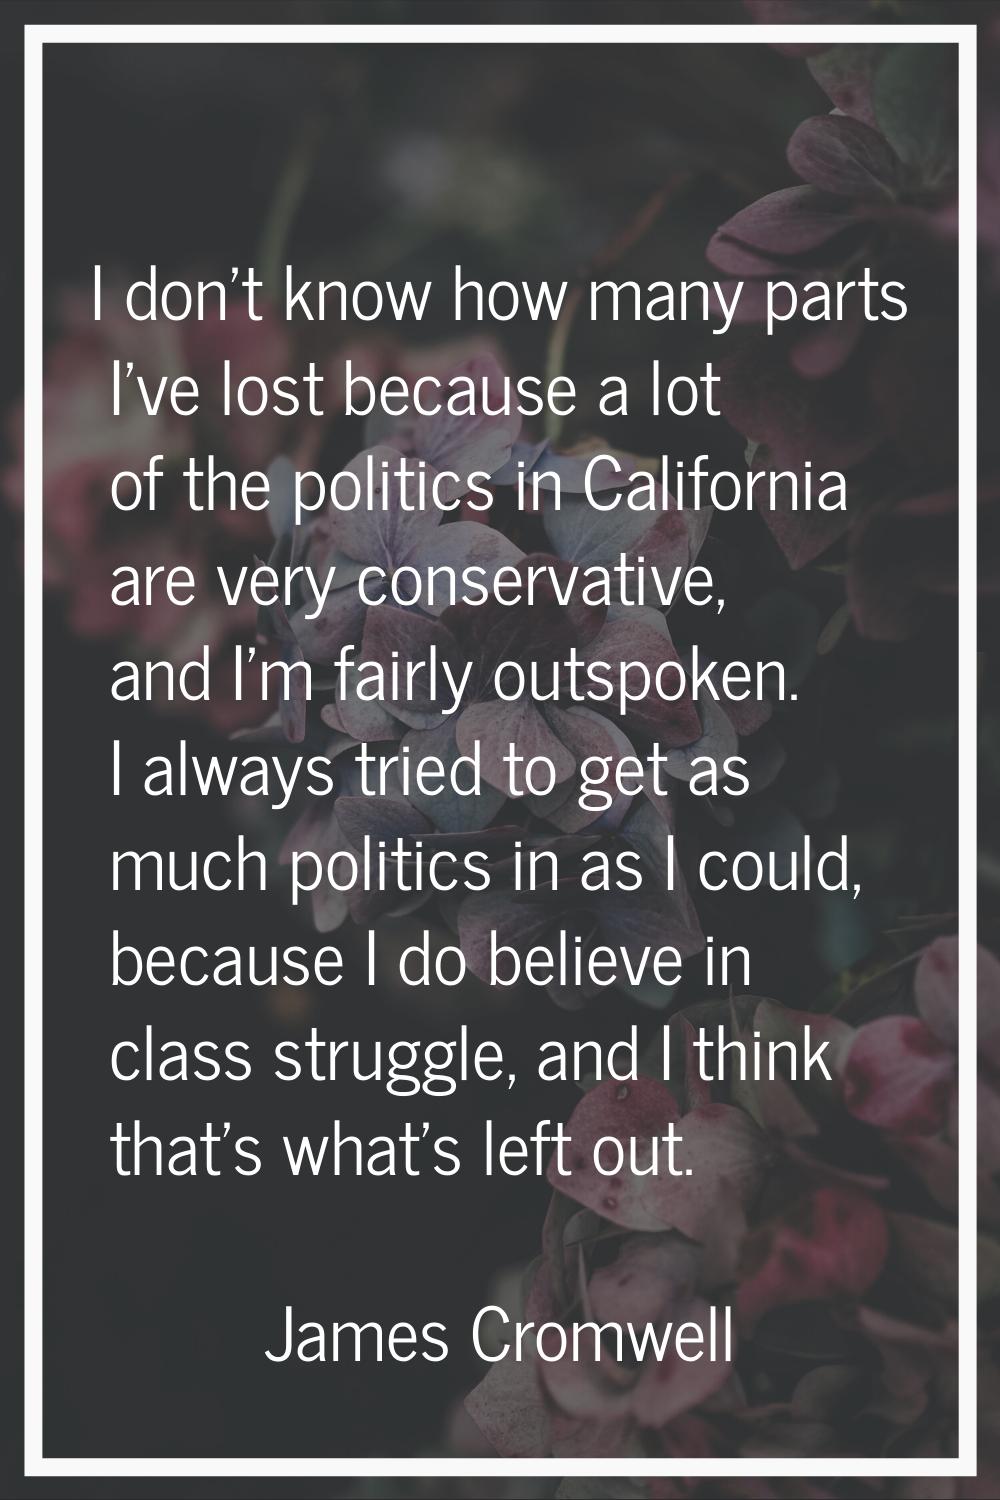 I don't know how many parts I've lost because a lot of the politics in California are very conserva